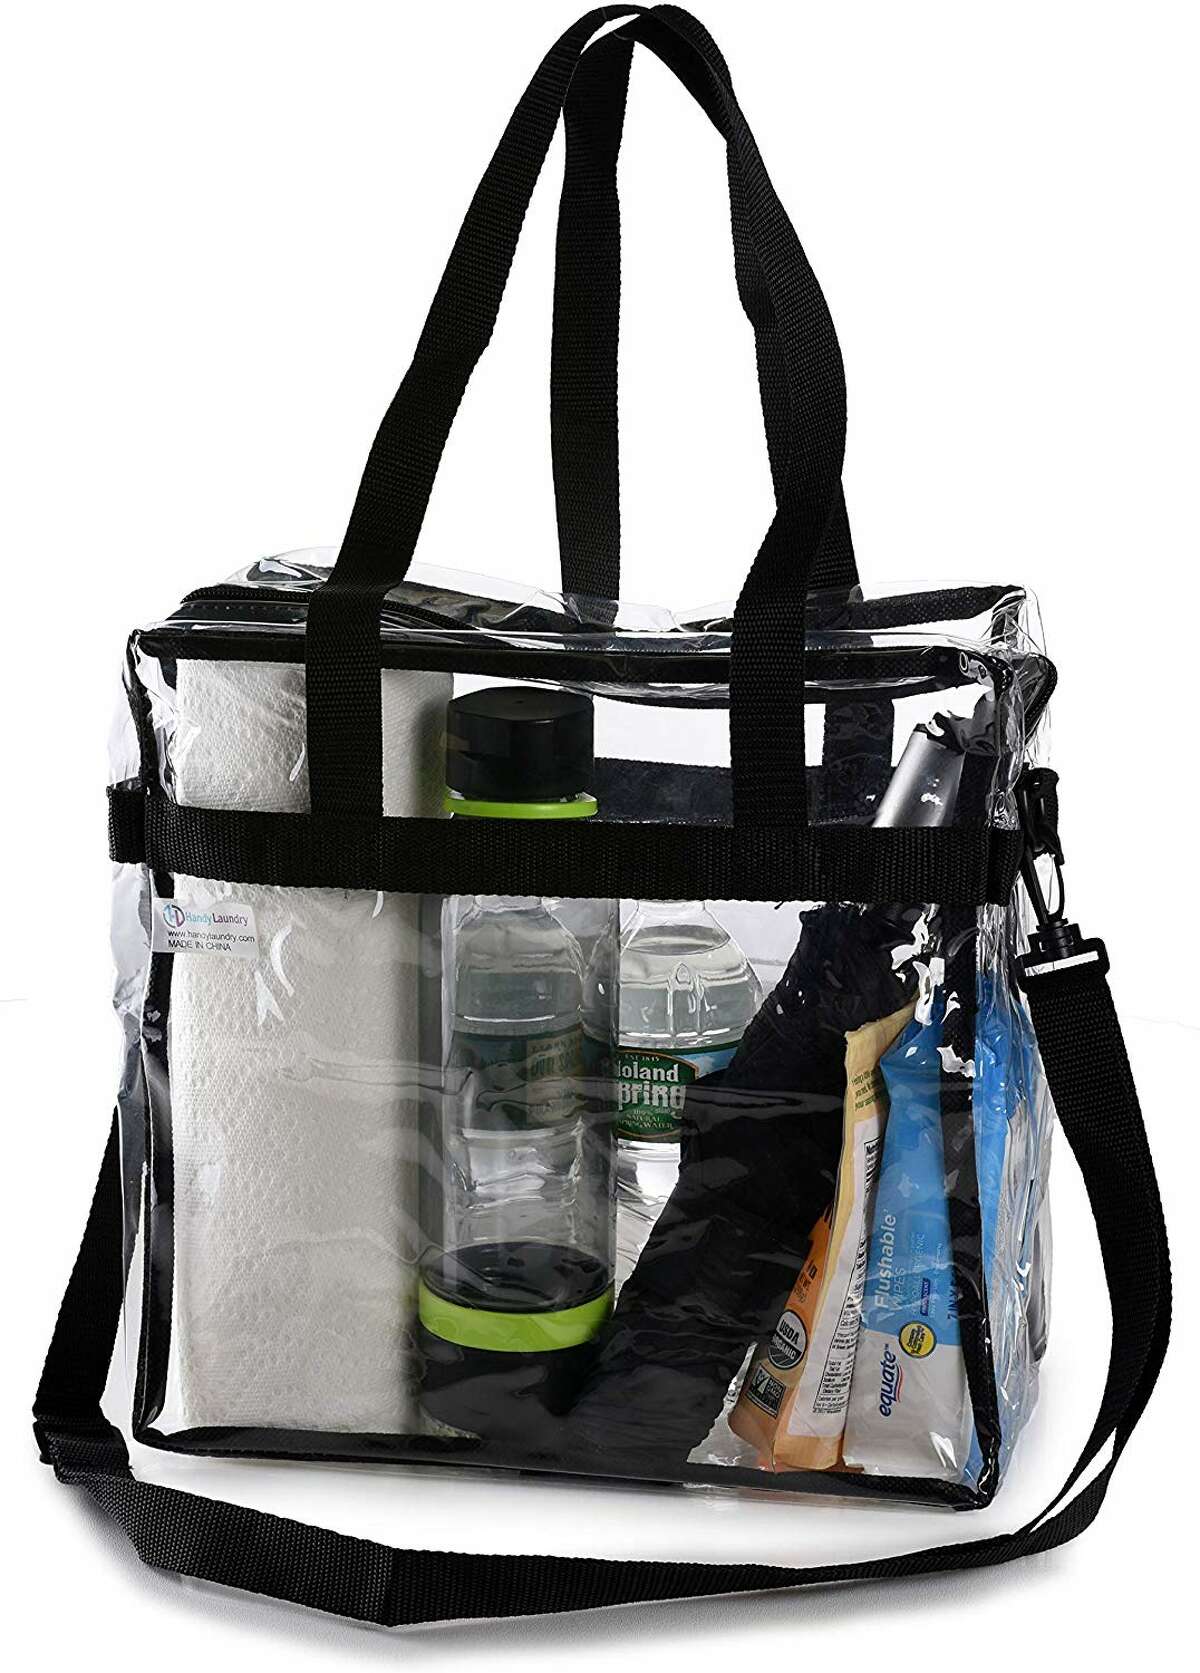 Best clear bags for NFL stadiums and concerts